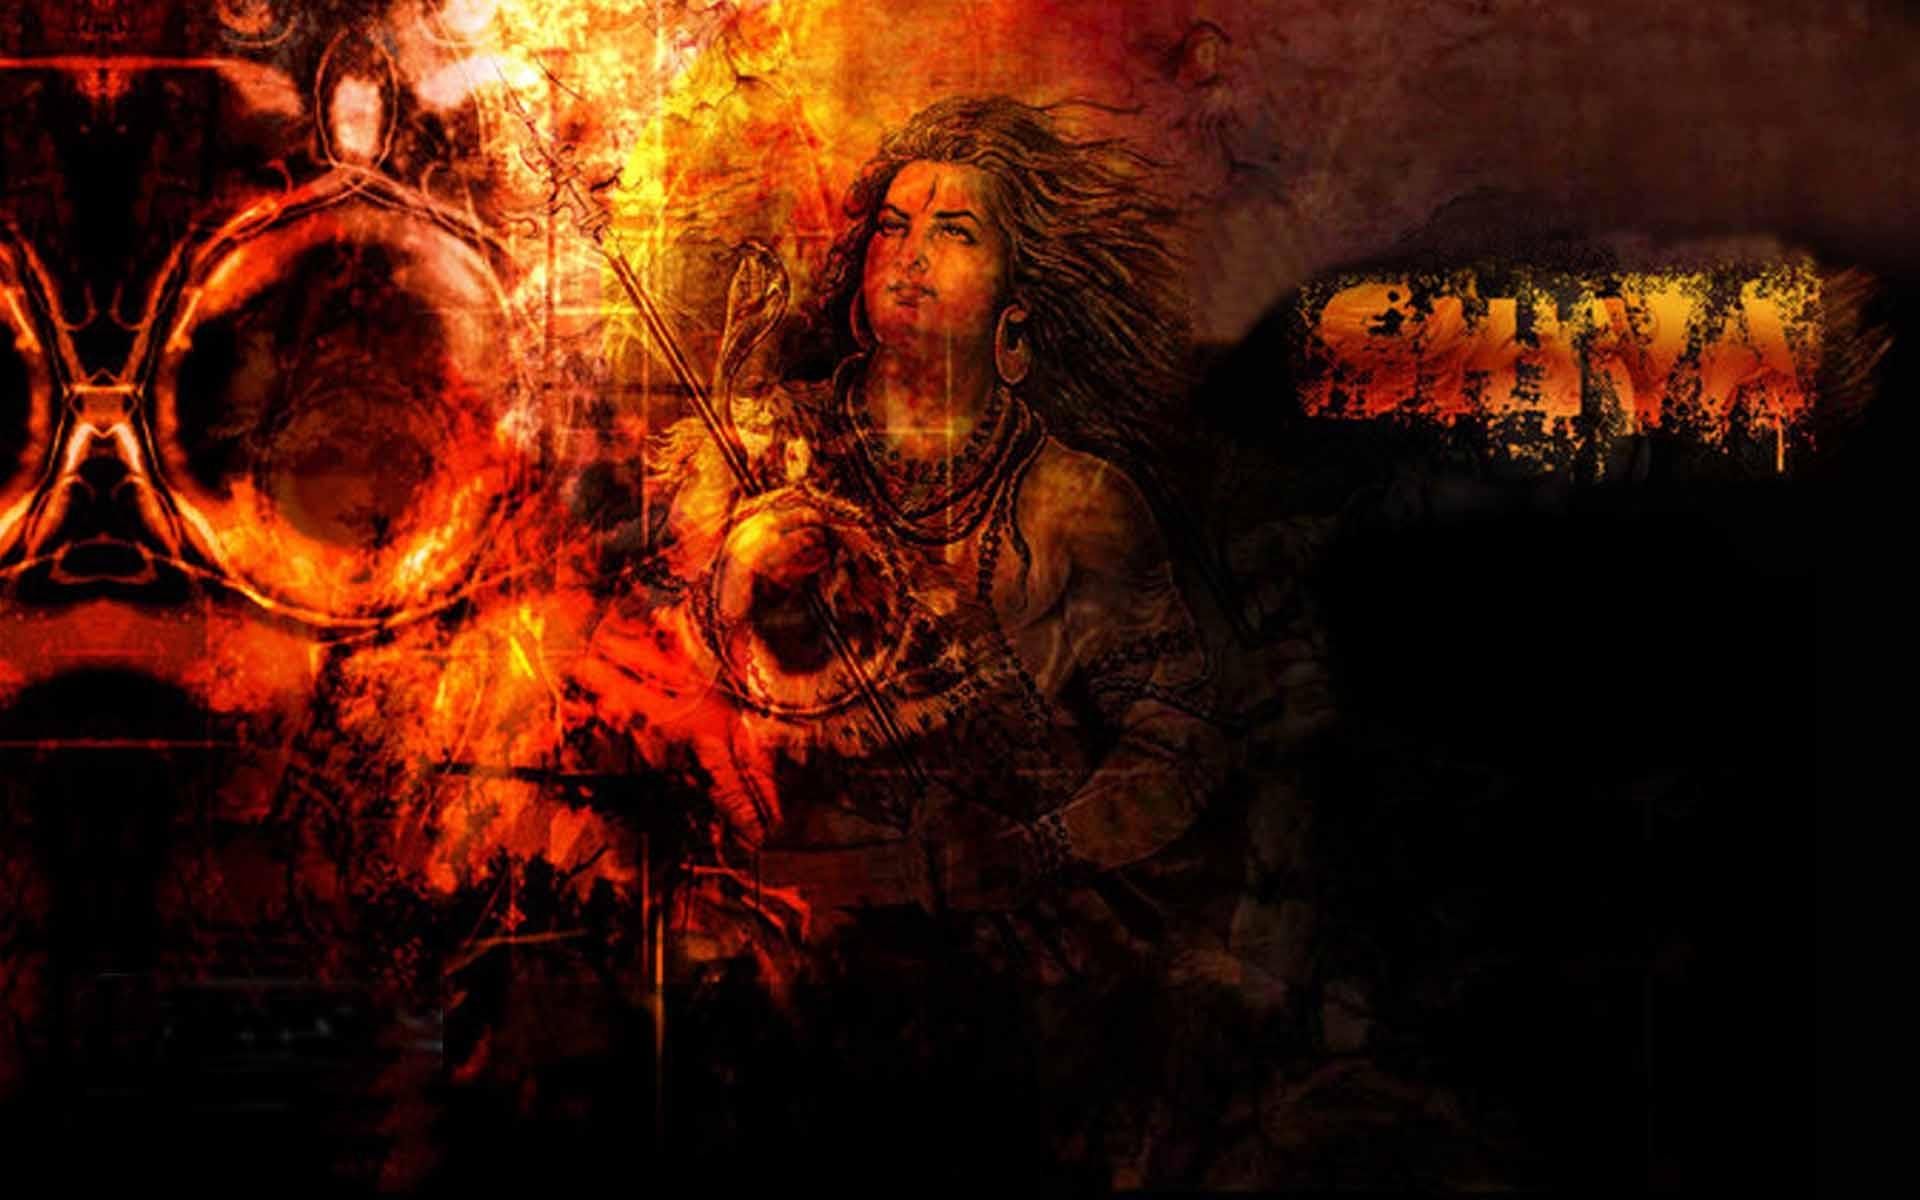 Lord Shiva High Definition Wallpaper, image collections